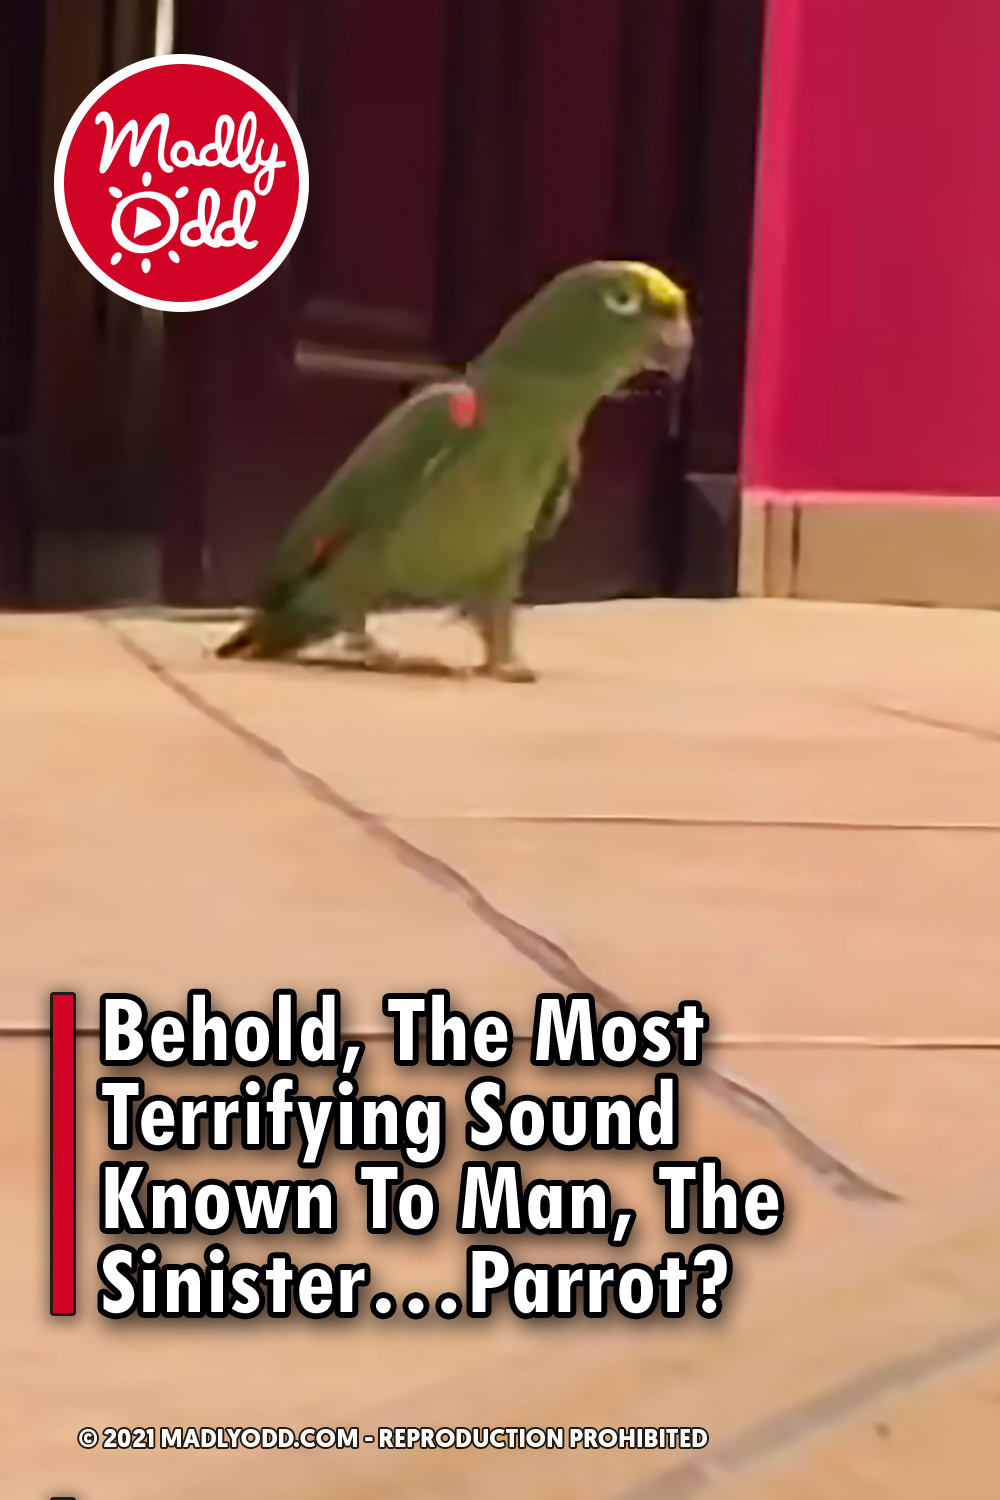 Behold, The Most Terrifying Sound Known To Man, The Sinister...Parrot?